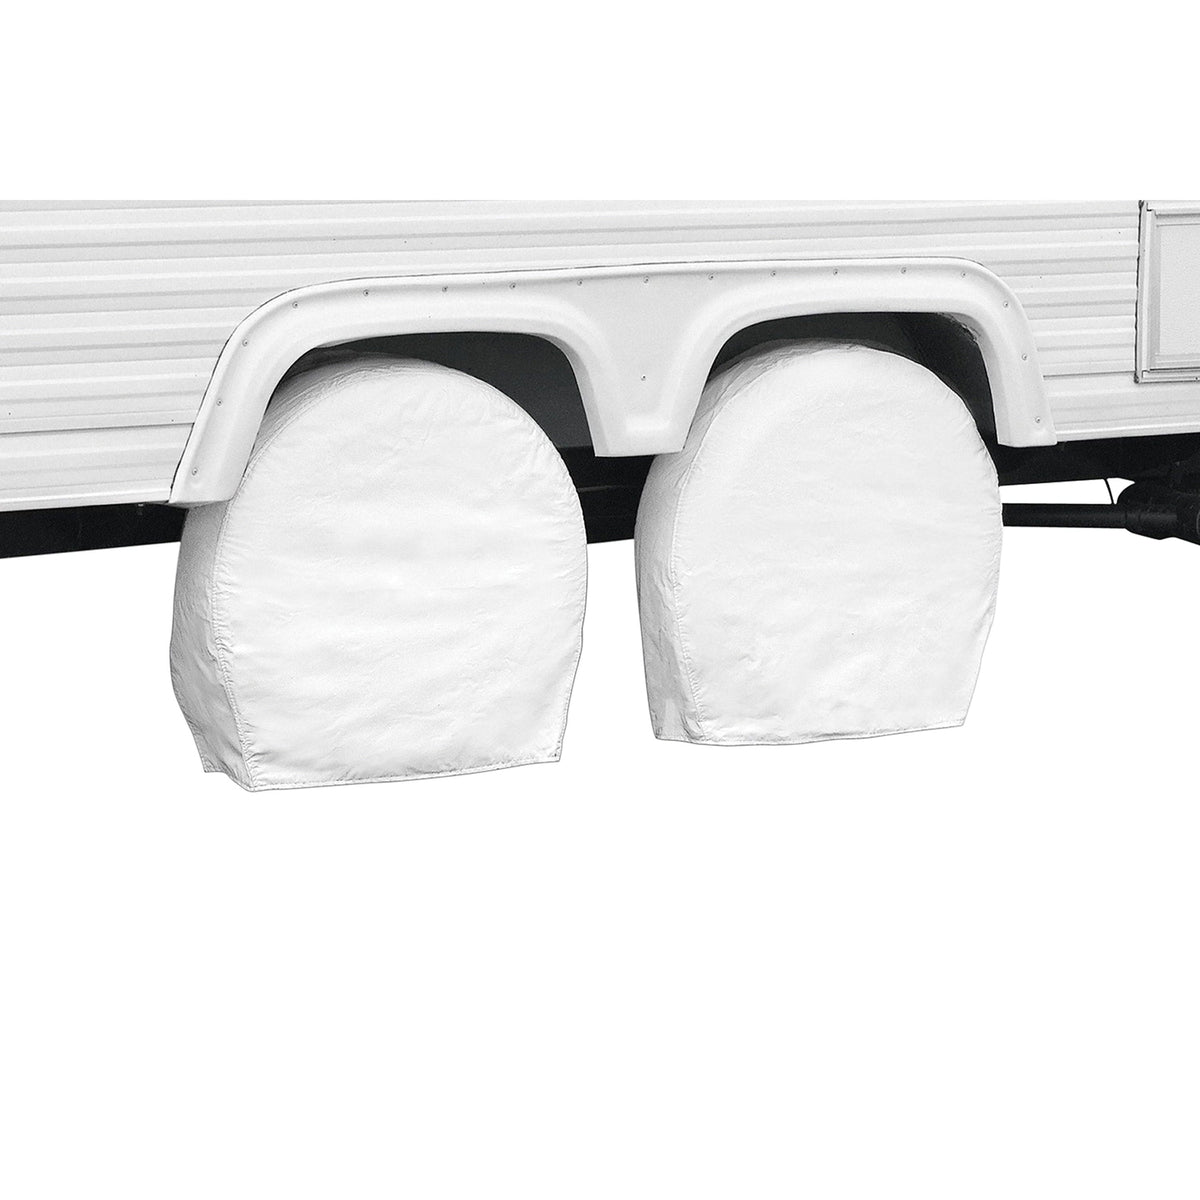 Classic Accessories Qualifies for Free Shipping Classic Accessories Over Drive RV Wheel Cover 33-36" x 9" White #76280